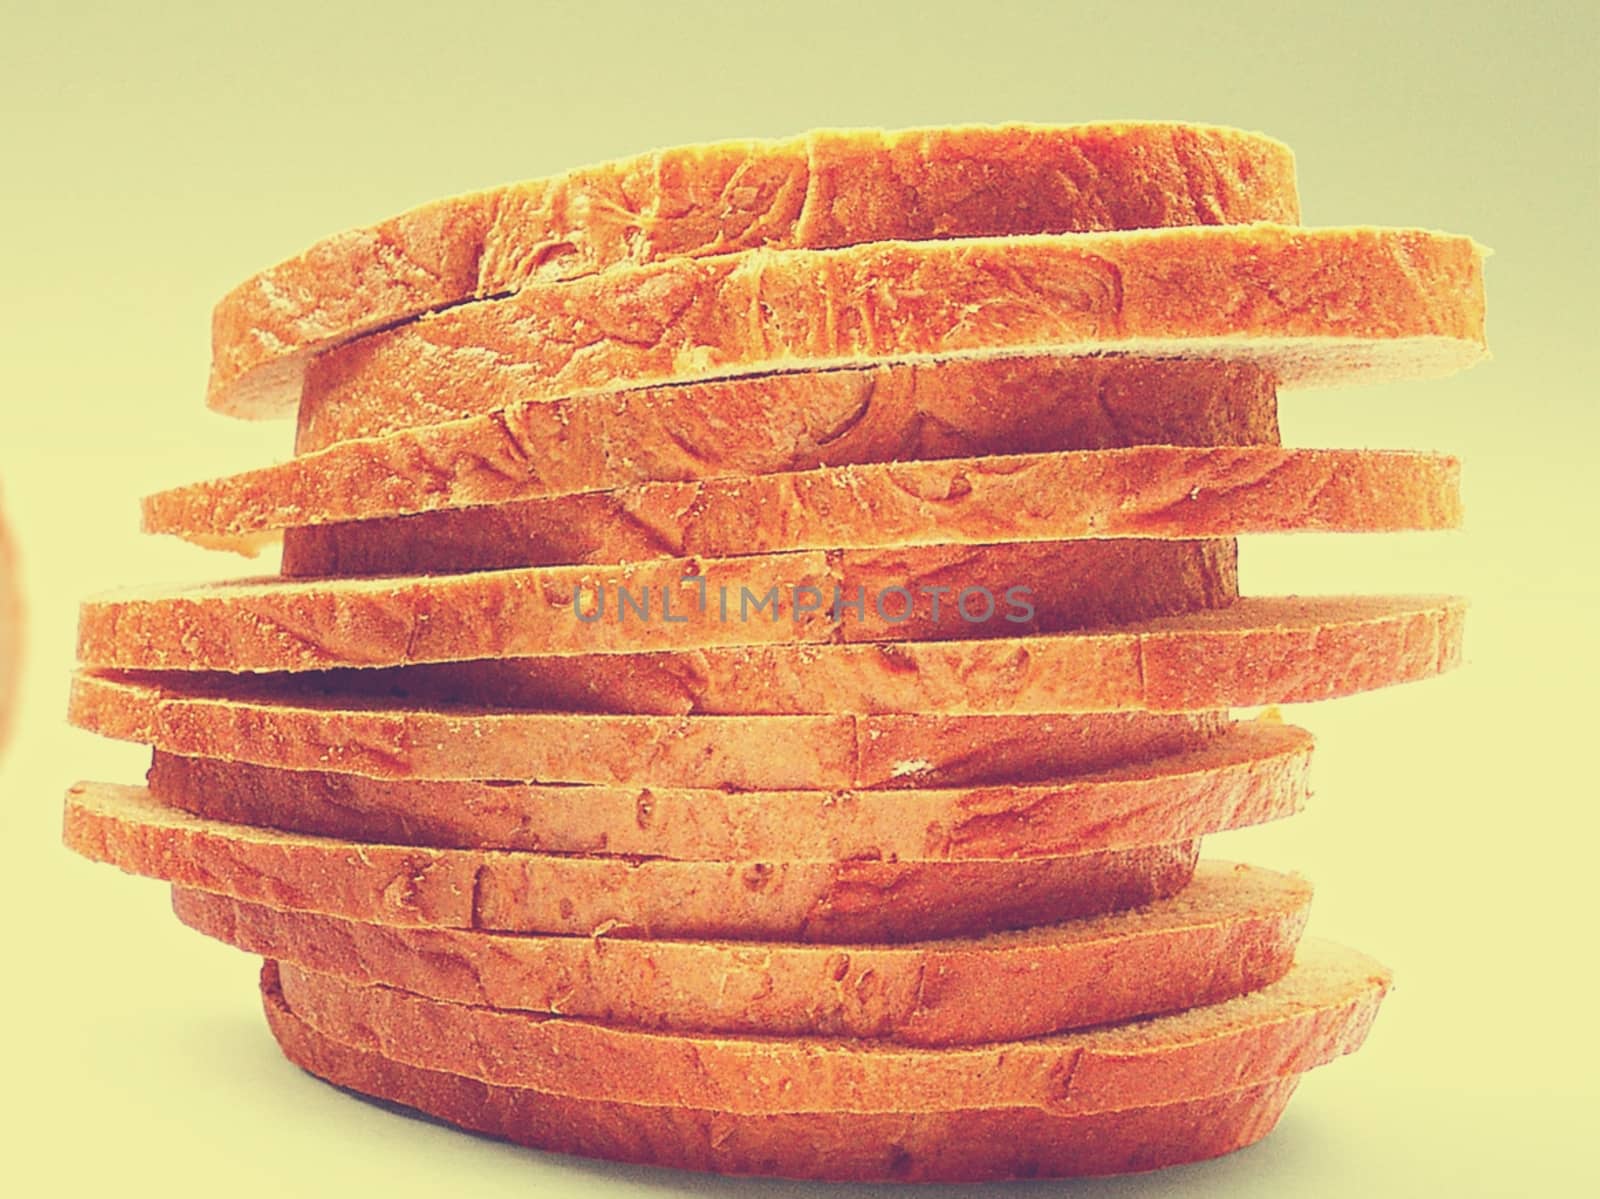 Close-up of bread slices stacked on top of each other by balage941